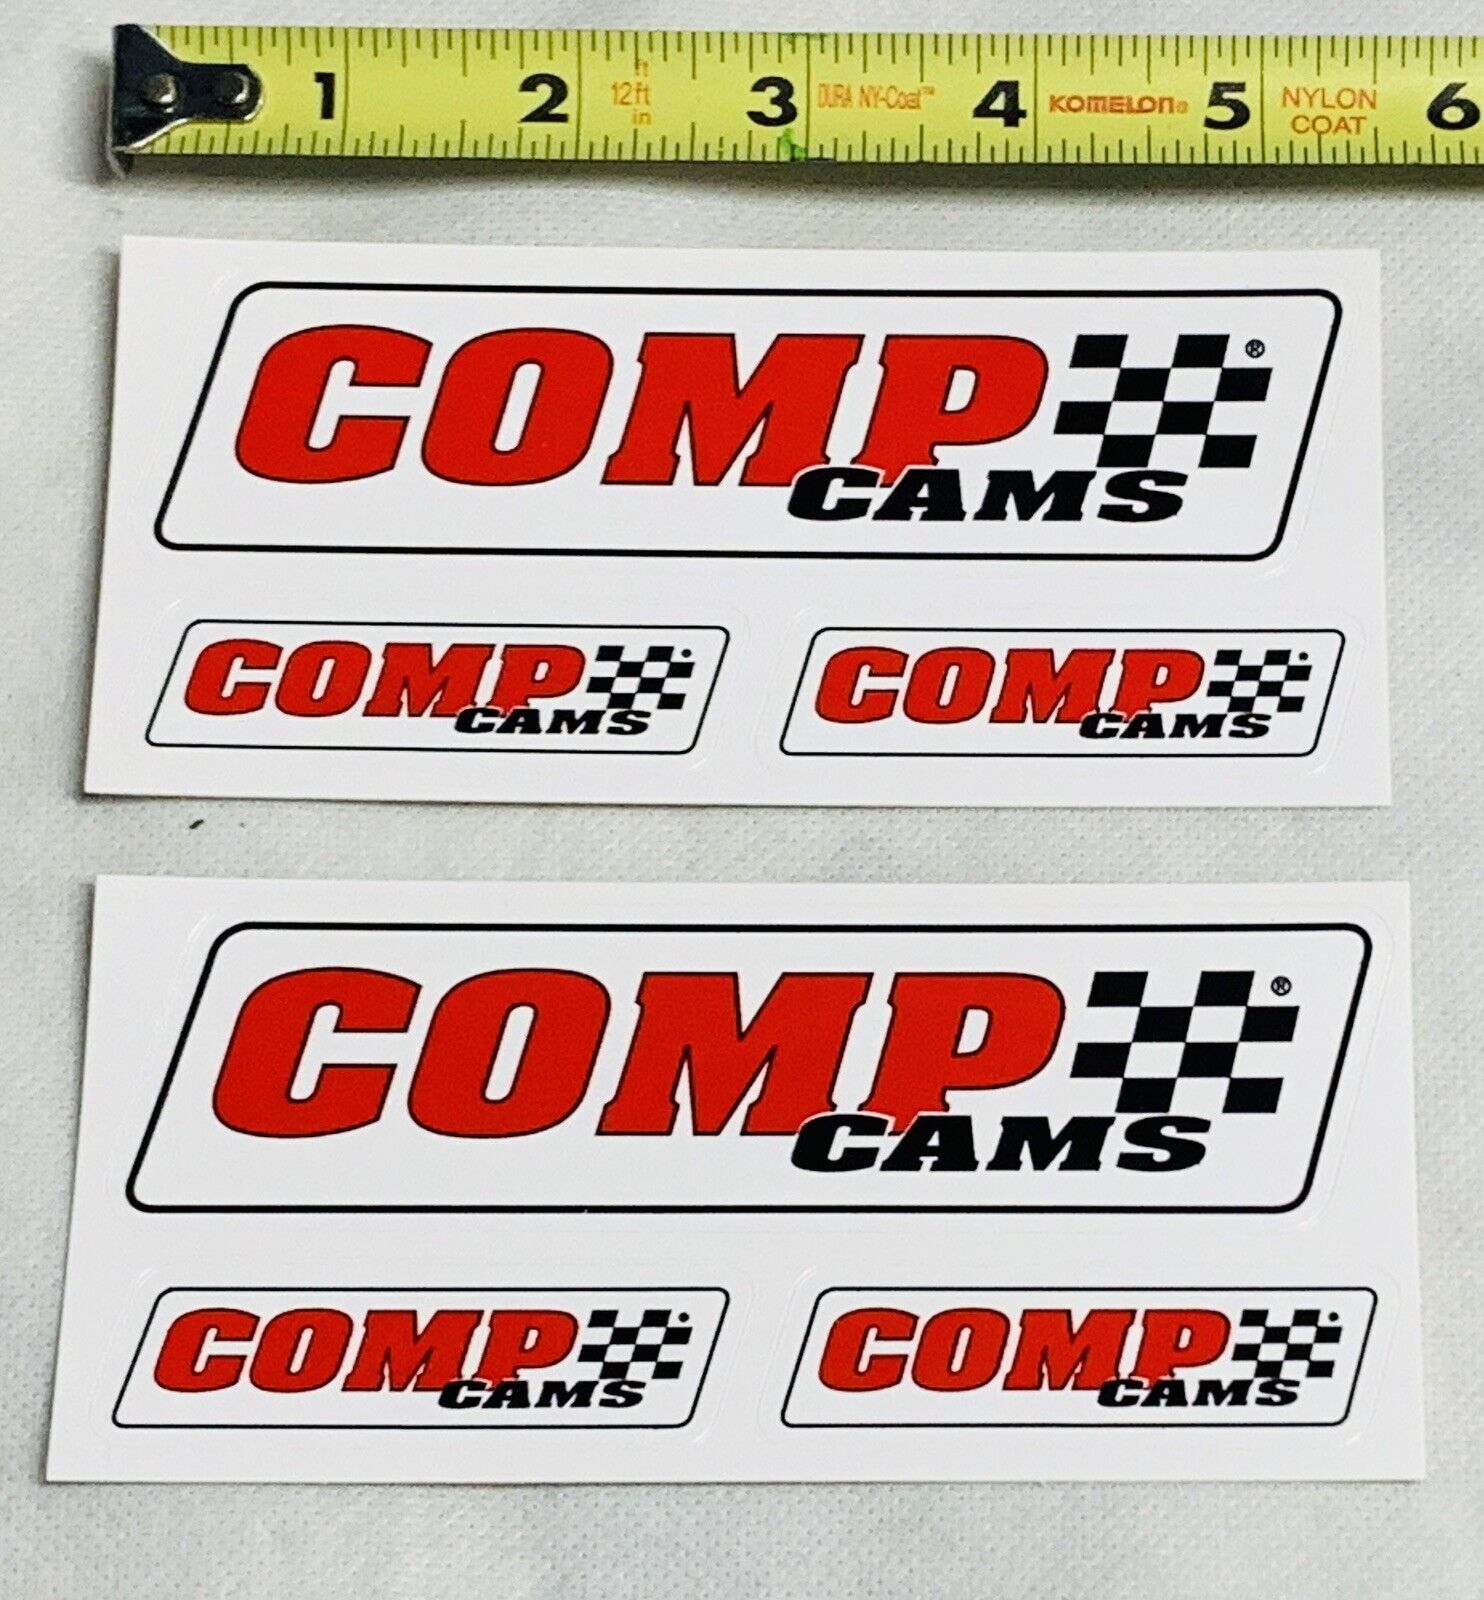 2 Competition Comp Cams Original Sheet w/3 Stickers ea. Vintage Racing Sticker